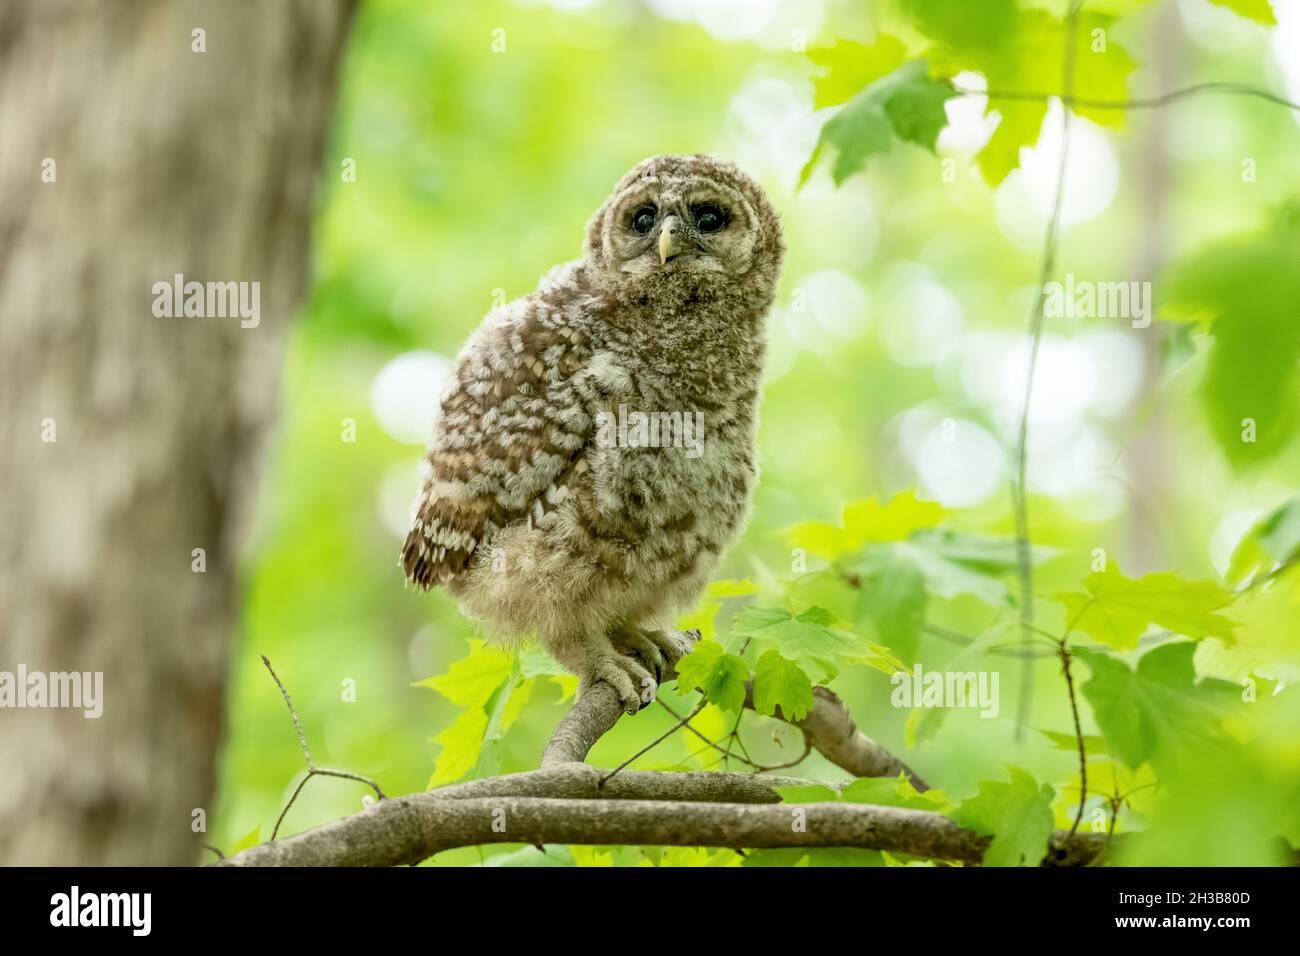 Young barred owlet perched on a branch in the woods Stock Photo